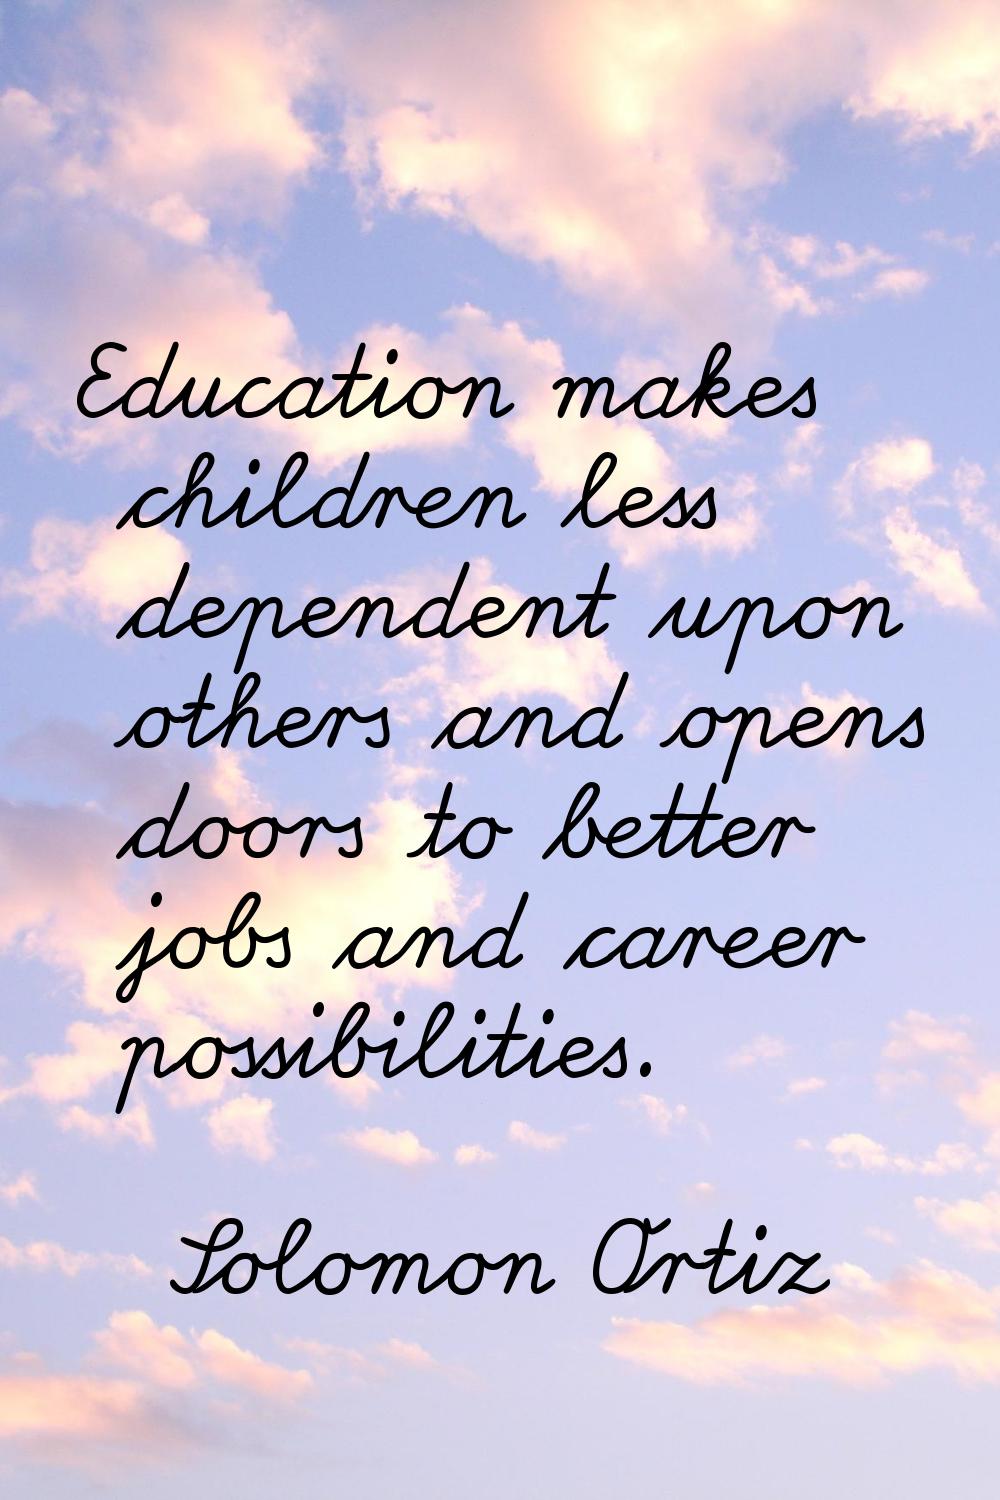 Education makes children less dependent upon others and opens doors to better jobs and career possi